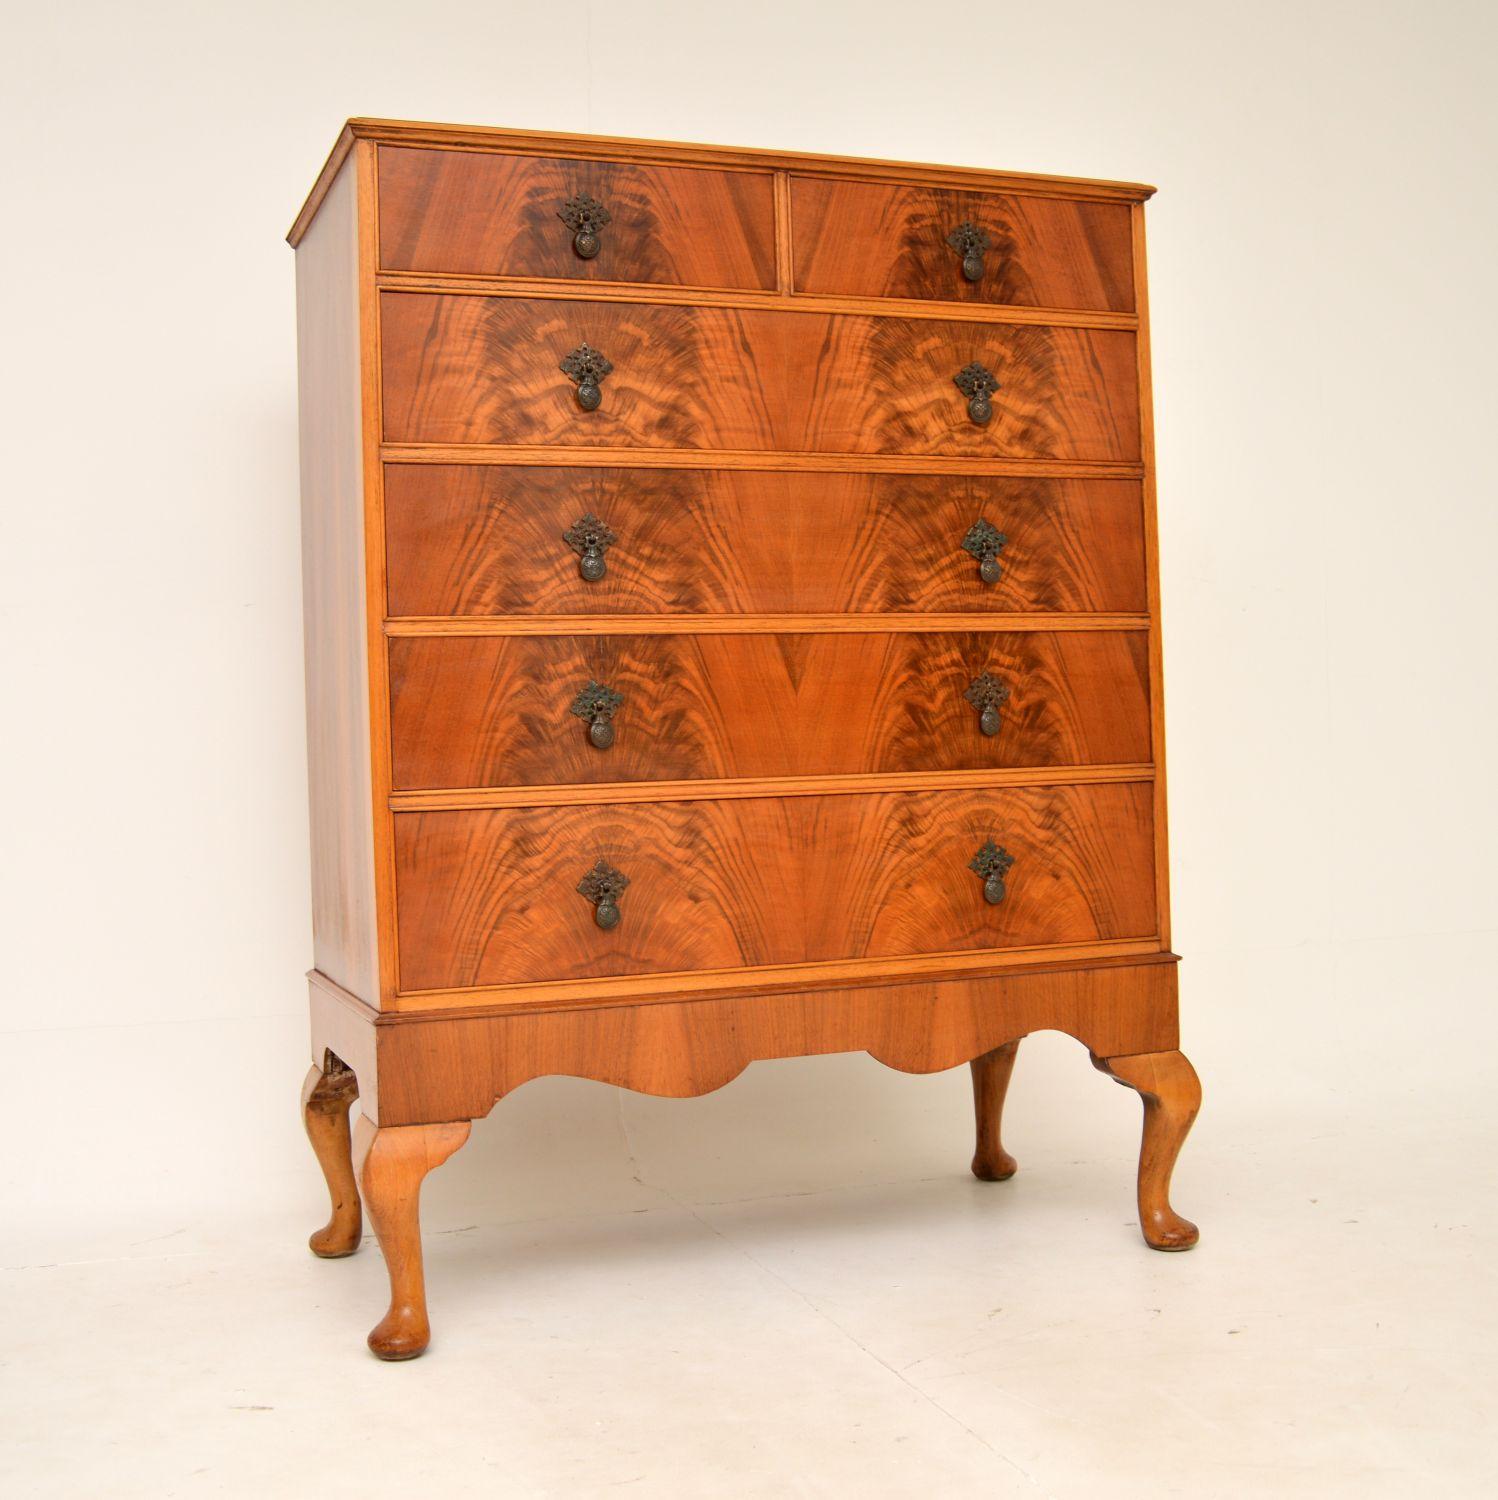 A fine antique figured walnut chest of drawers on legs. This was made in England, and dates from around the 1930’s.

It is of superb quality and is a great size, with lots of storage space. The colour tone and figured walnut grain patterns are